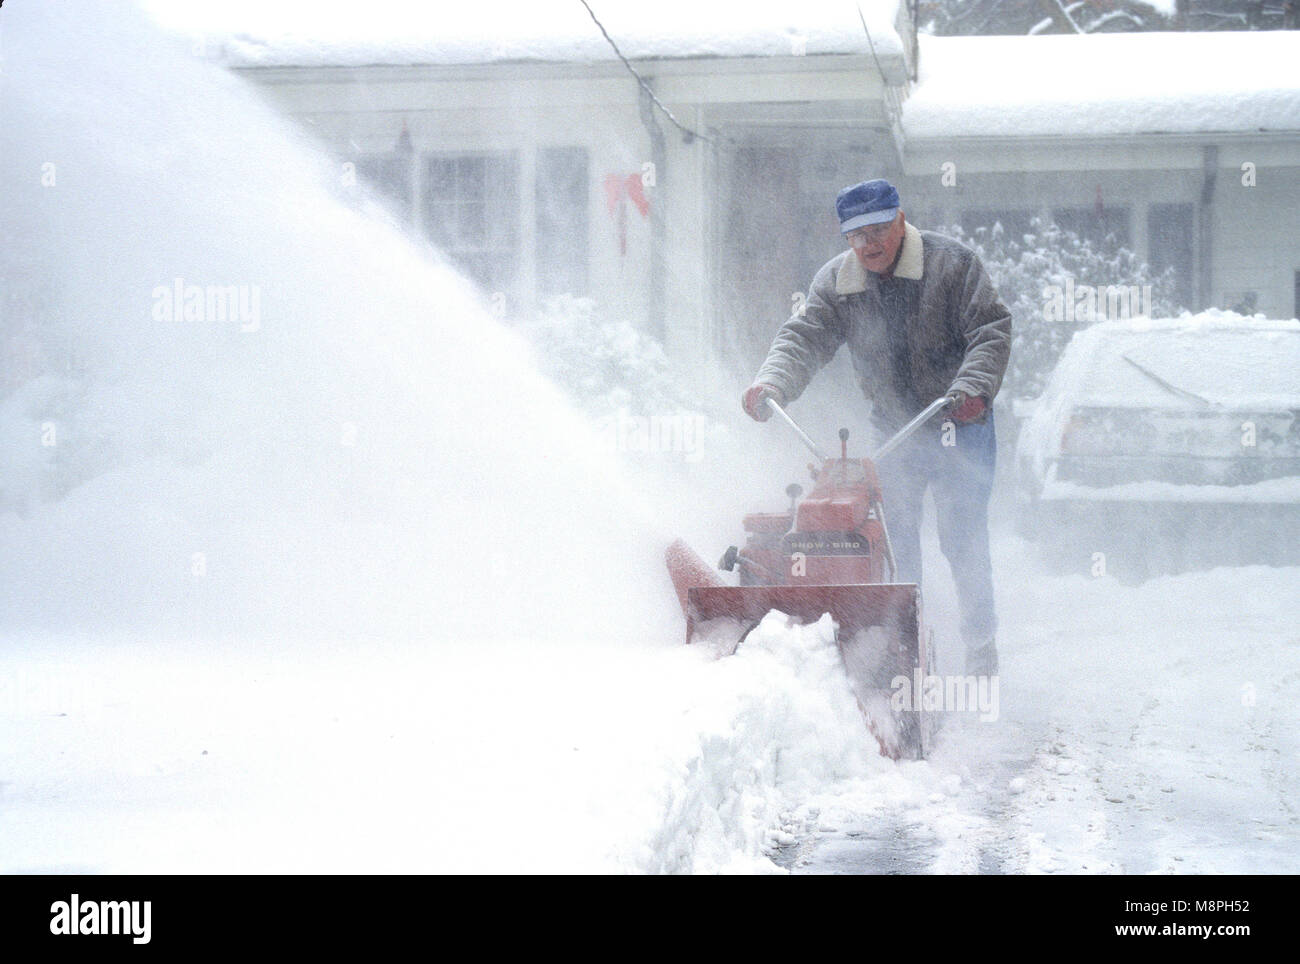 A man using a snowblower in his driveway during a snowstorm.USA Stock Photo